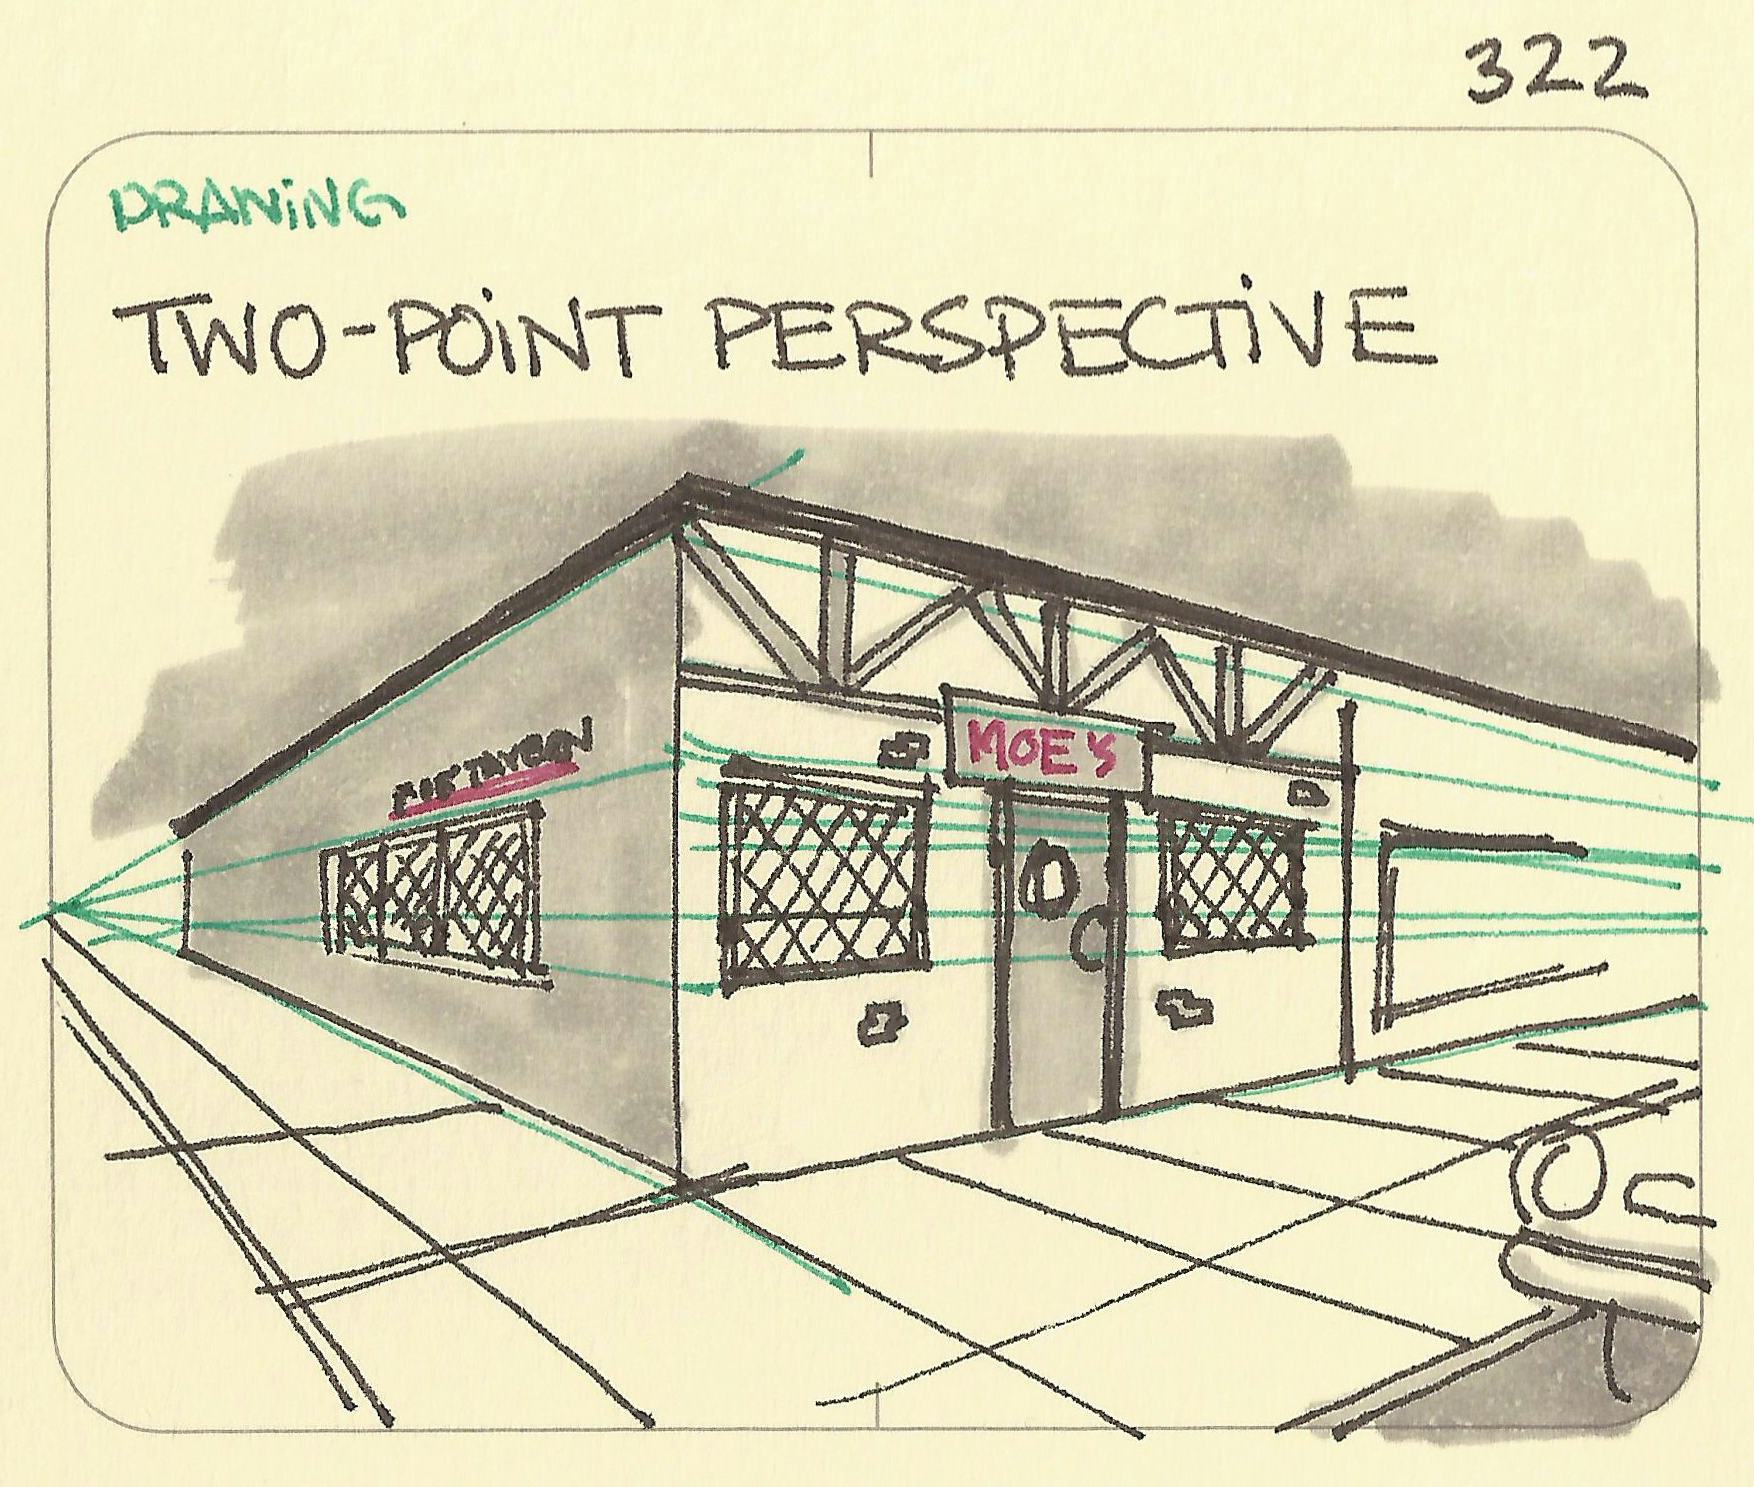 Two-point perspective - Sketchplanations